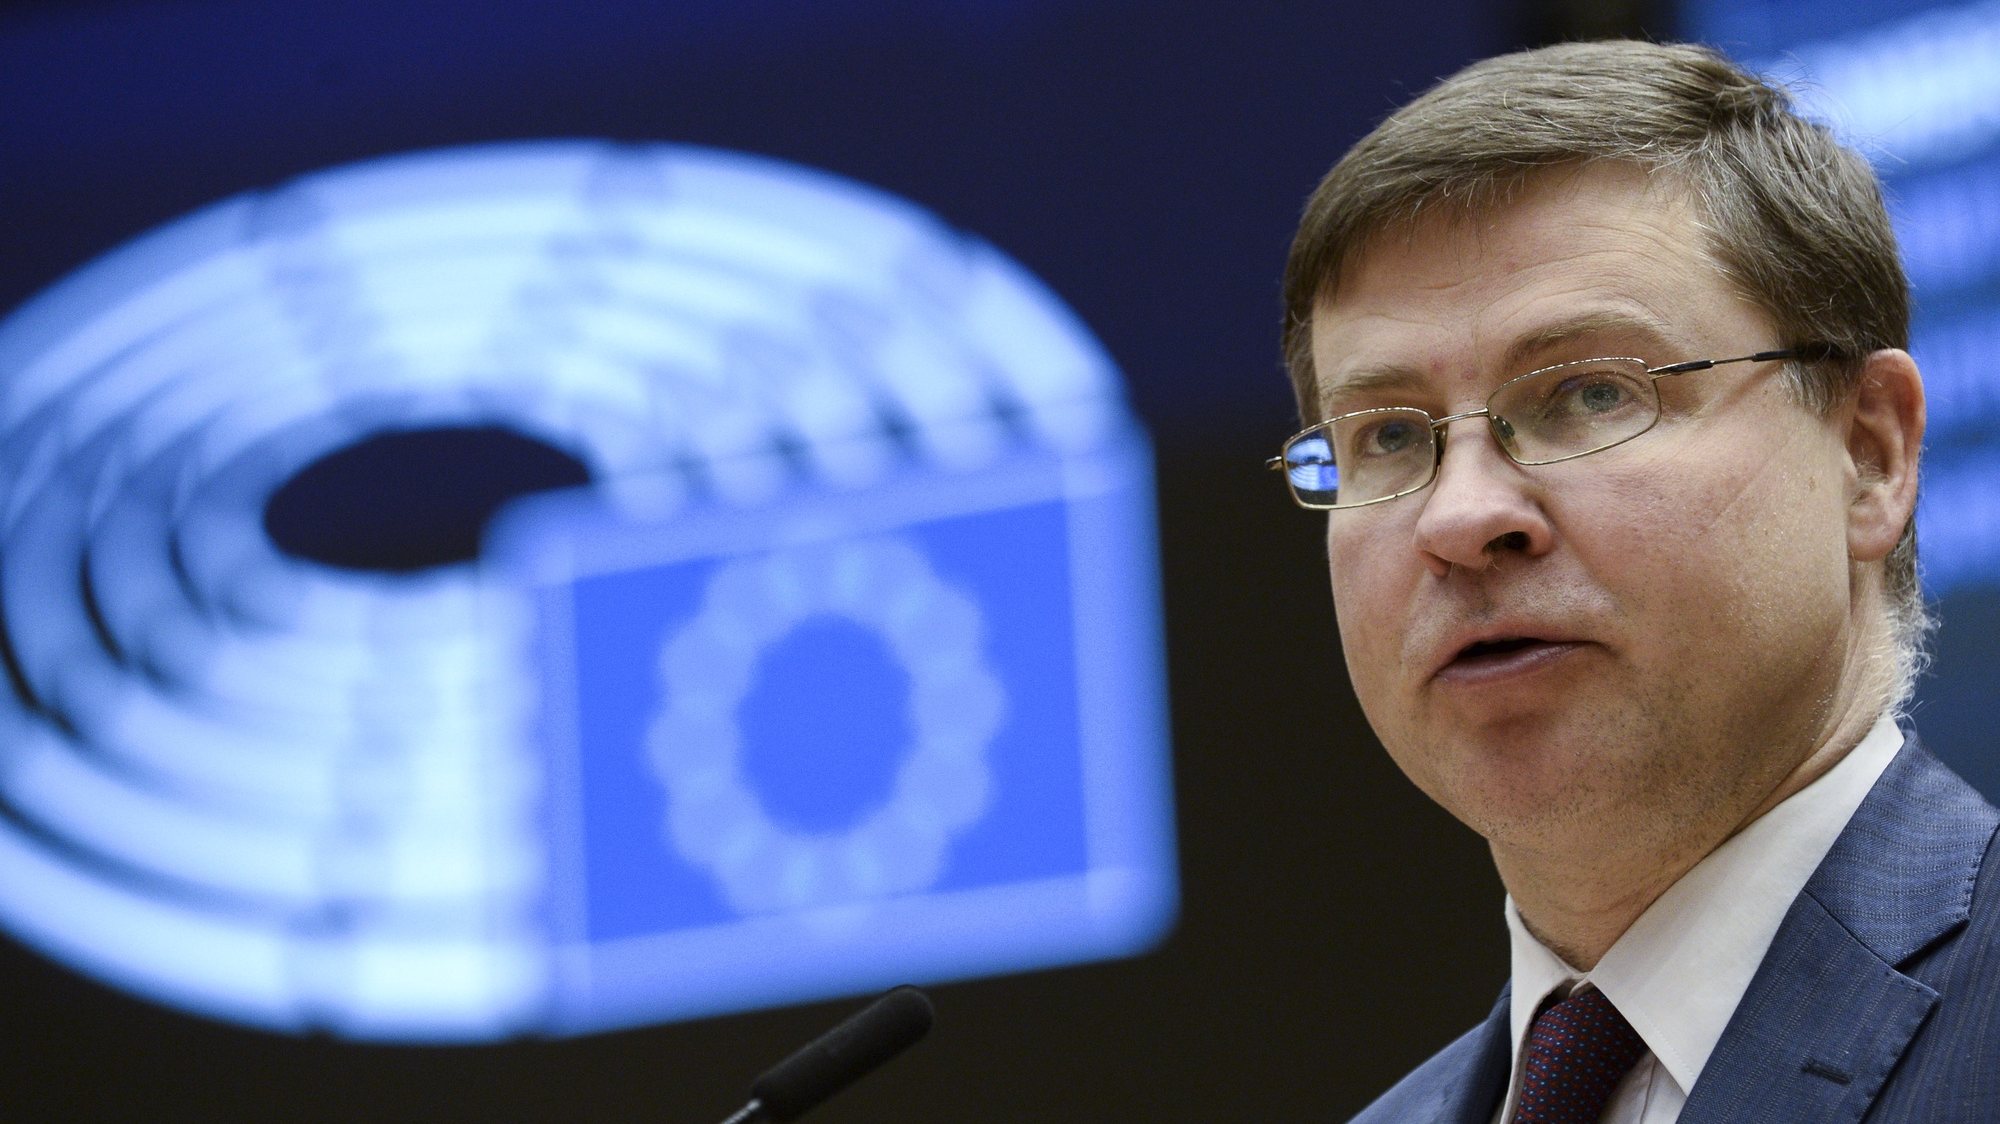 epa09064909 European Commission Vice-President Valdis Dombrovskis speaks during a plenary session at the European Parliament in Brussels, Belgium, 10 March 2021.  EPA/JOHANNA GERON / POOL